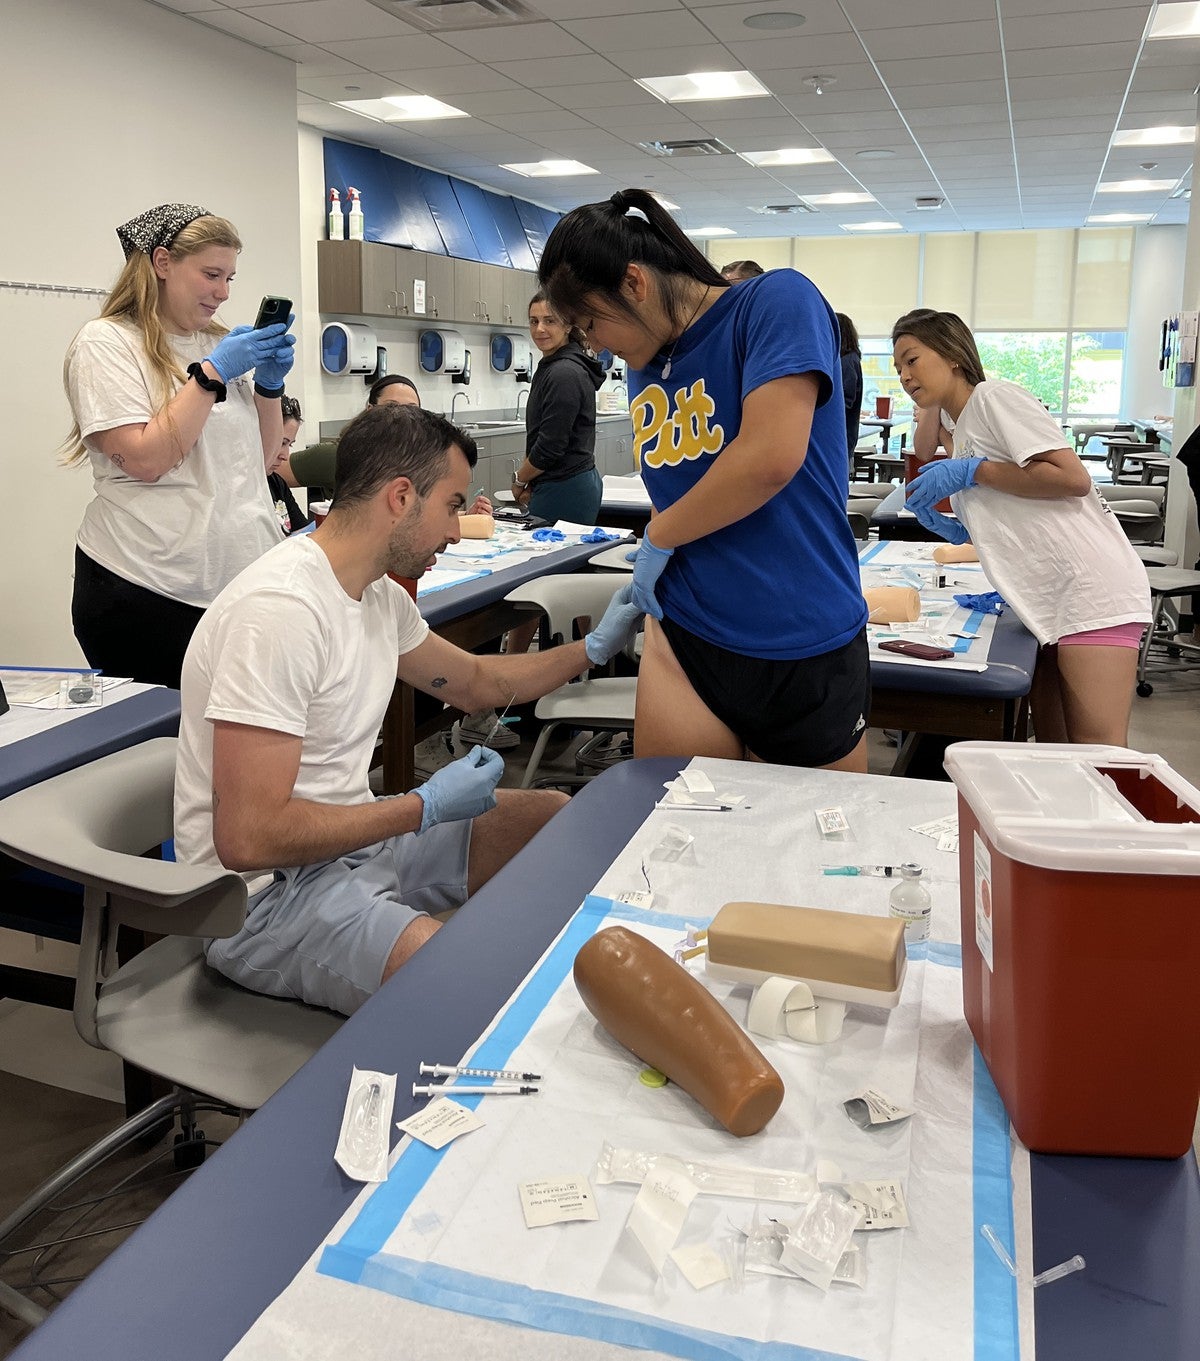 Pitt PAS students giving and receiving ventrogluteal injections